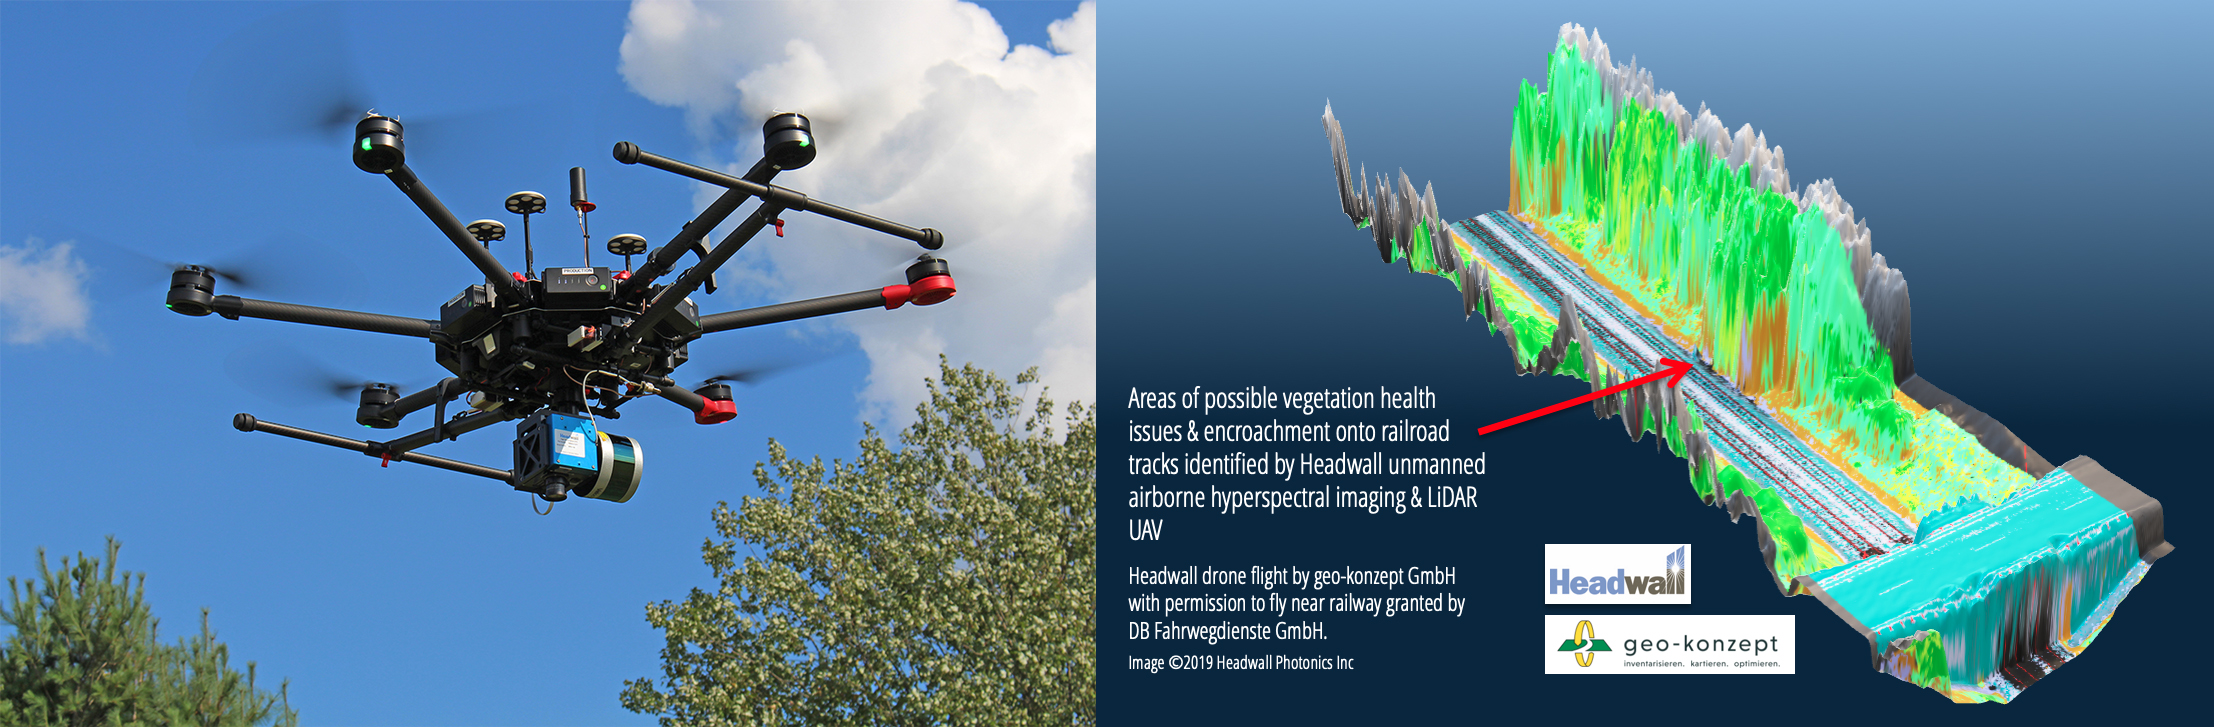 Left: Headwall unmanned aerial vehicles (UAVs) are lightweight and fly pre-programmed flight paths, gathering hyperspectral imaging data over the UV to near-infrared range. Commercial firsts include LiDAR for creating high-precision digital elevation models (DEMs) and data-fusion for visualization and application-specific analysis. Right: one example of an application-specific mission is capturing vegetation health and location to better detect encroachment on critical infrastructure, such as railways. Headwall and geo-konzept collaborated on a presentation at the most recent DJI AirWorks event. With the cooperation of Deutsche Bahn rail, geo-konzept flew a Headwall UAV, taking both hyperspectral images and LiDAR data. The resulting 3D images show can show both an indicator of plant health and the position of potentially at-risk trees adjacent to the railway.